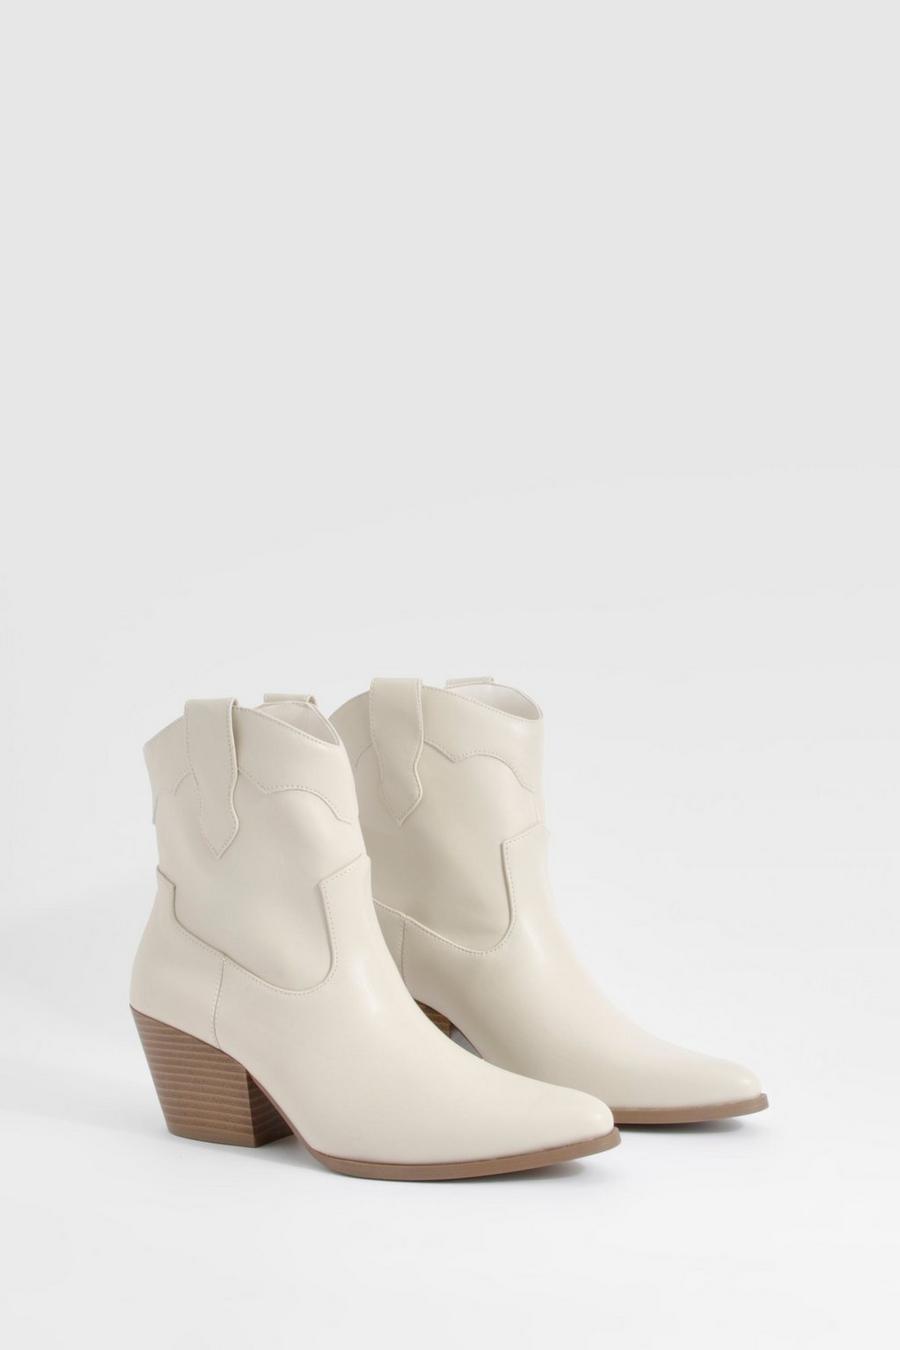 Cream white Tab Detail Low Ankle Cowboy Western Boots